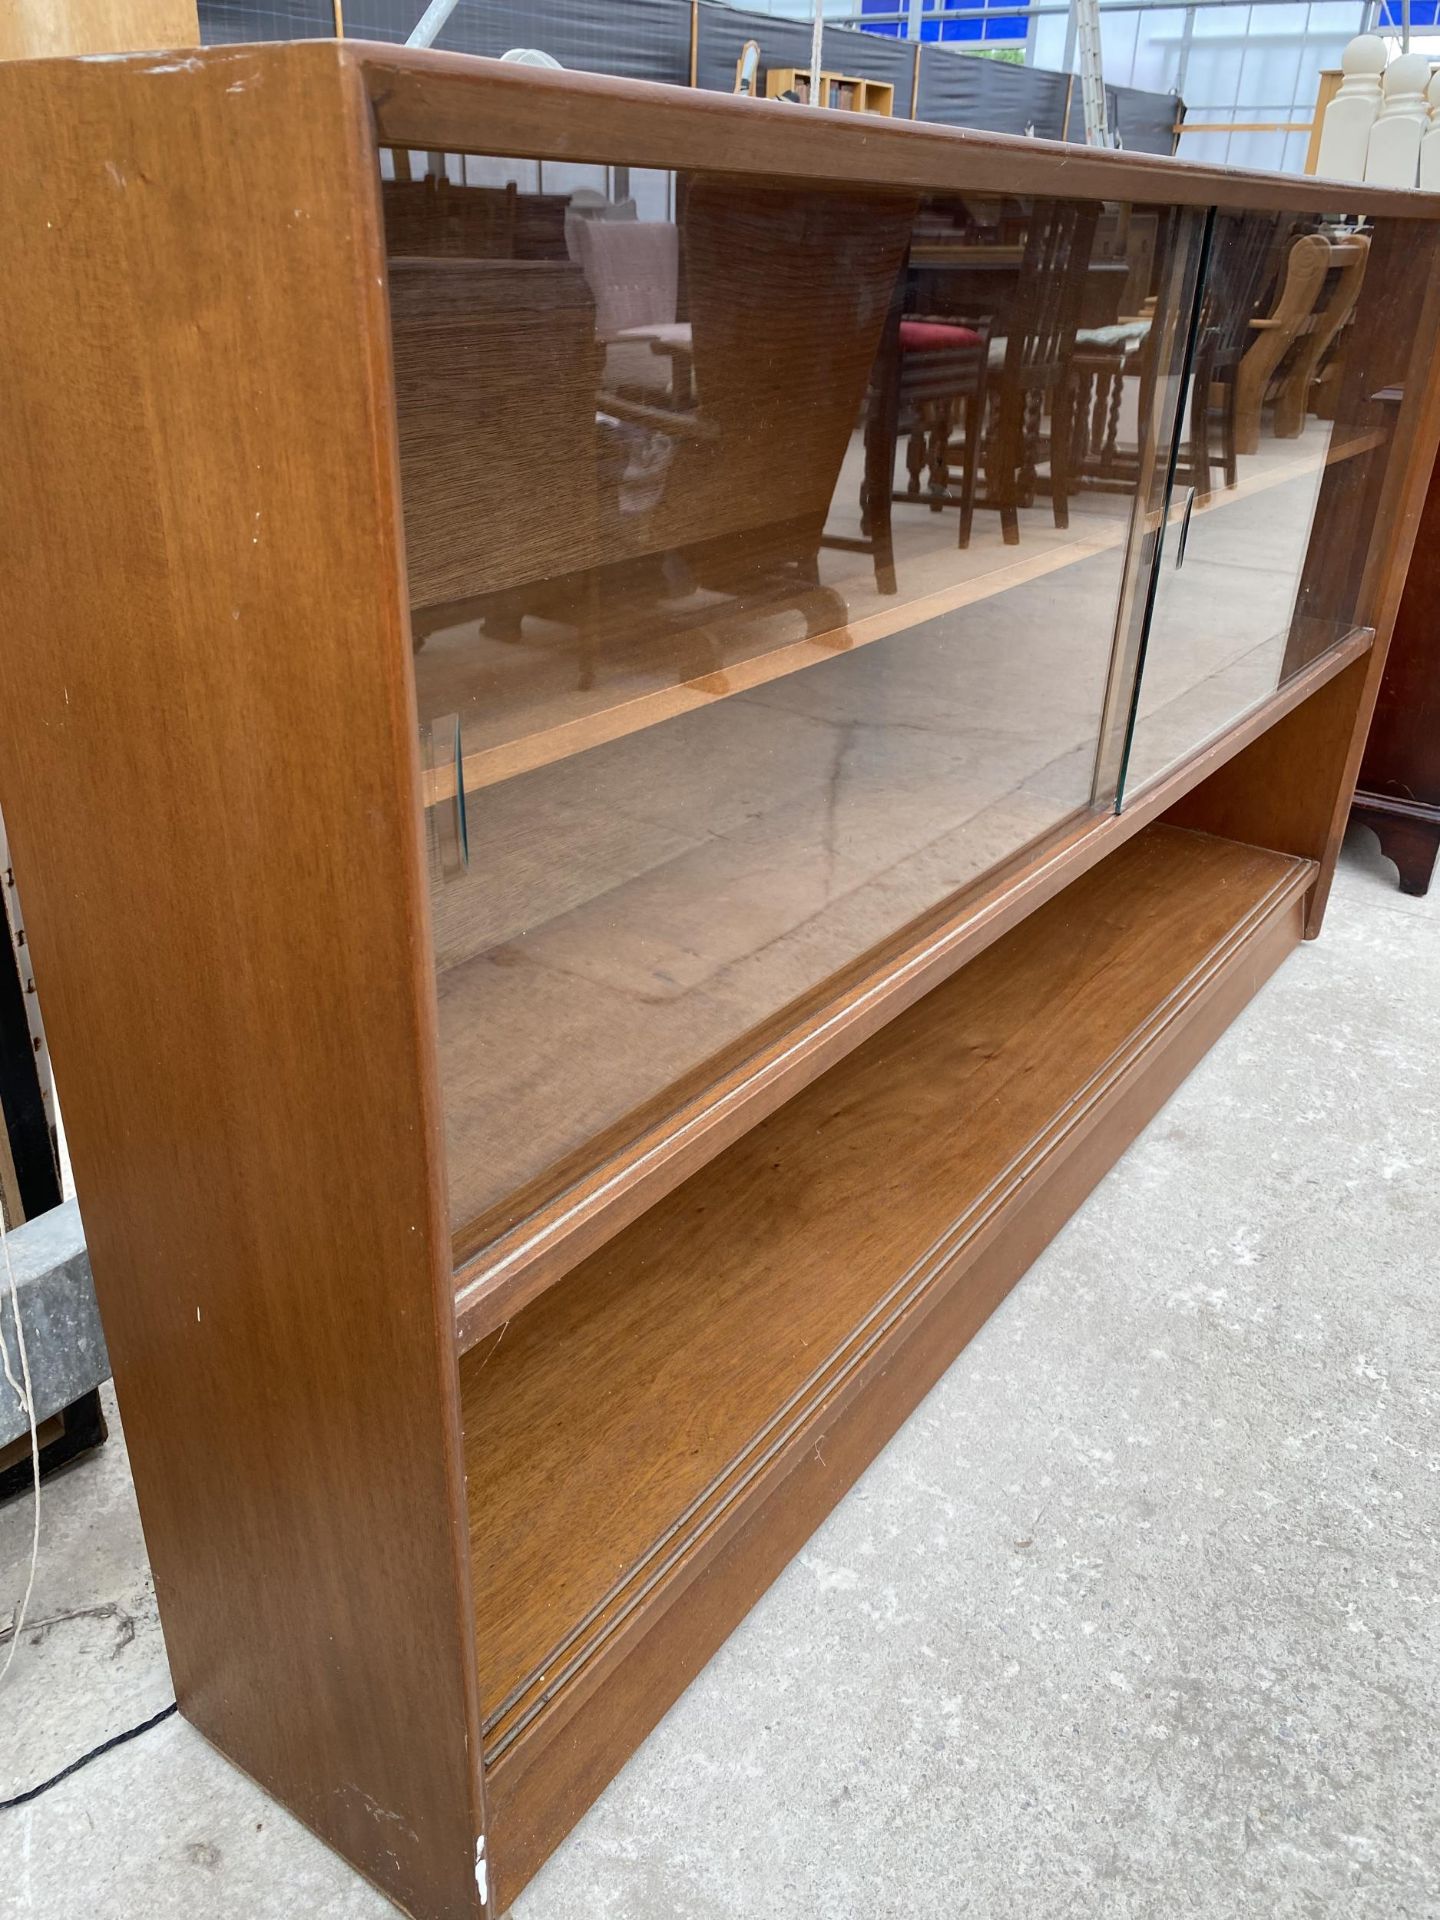 A RETRO TEAK HERBENT AND GIBBS GLASS FRAMED BOOKCASE 60" WIDE - Image 4 of 6